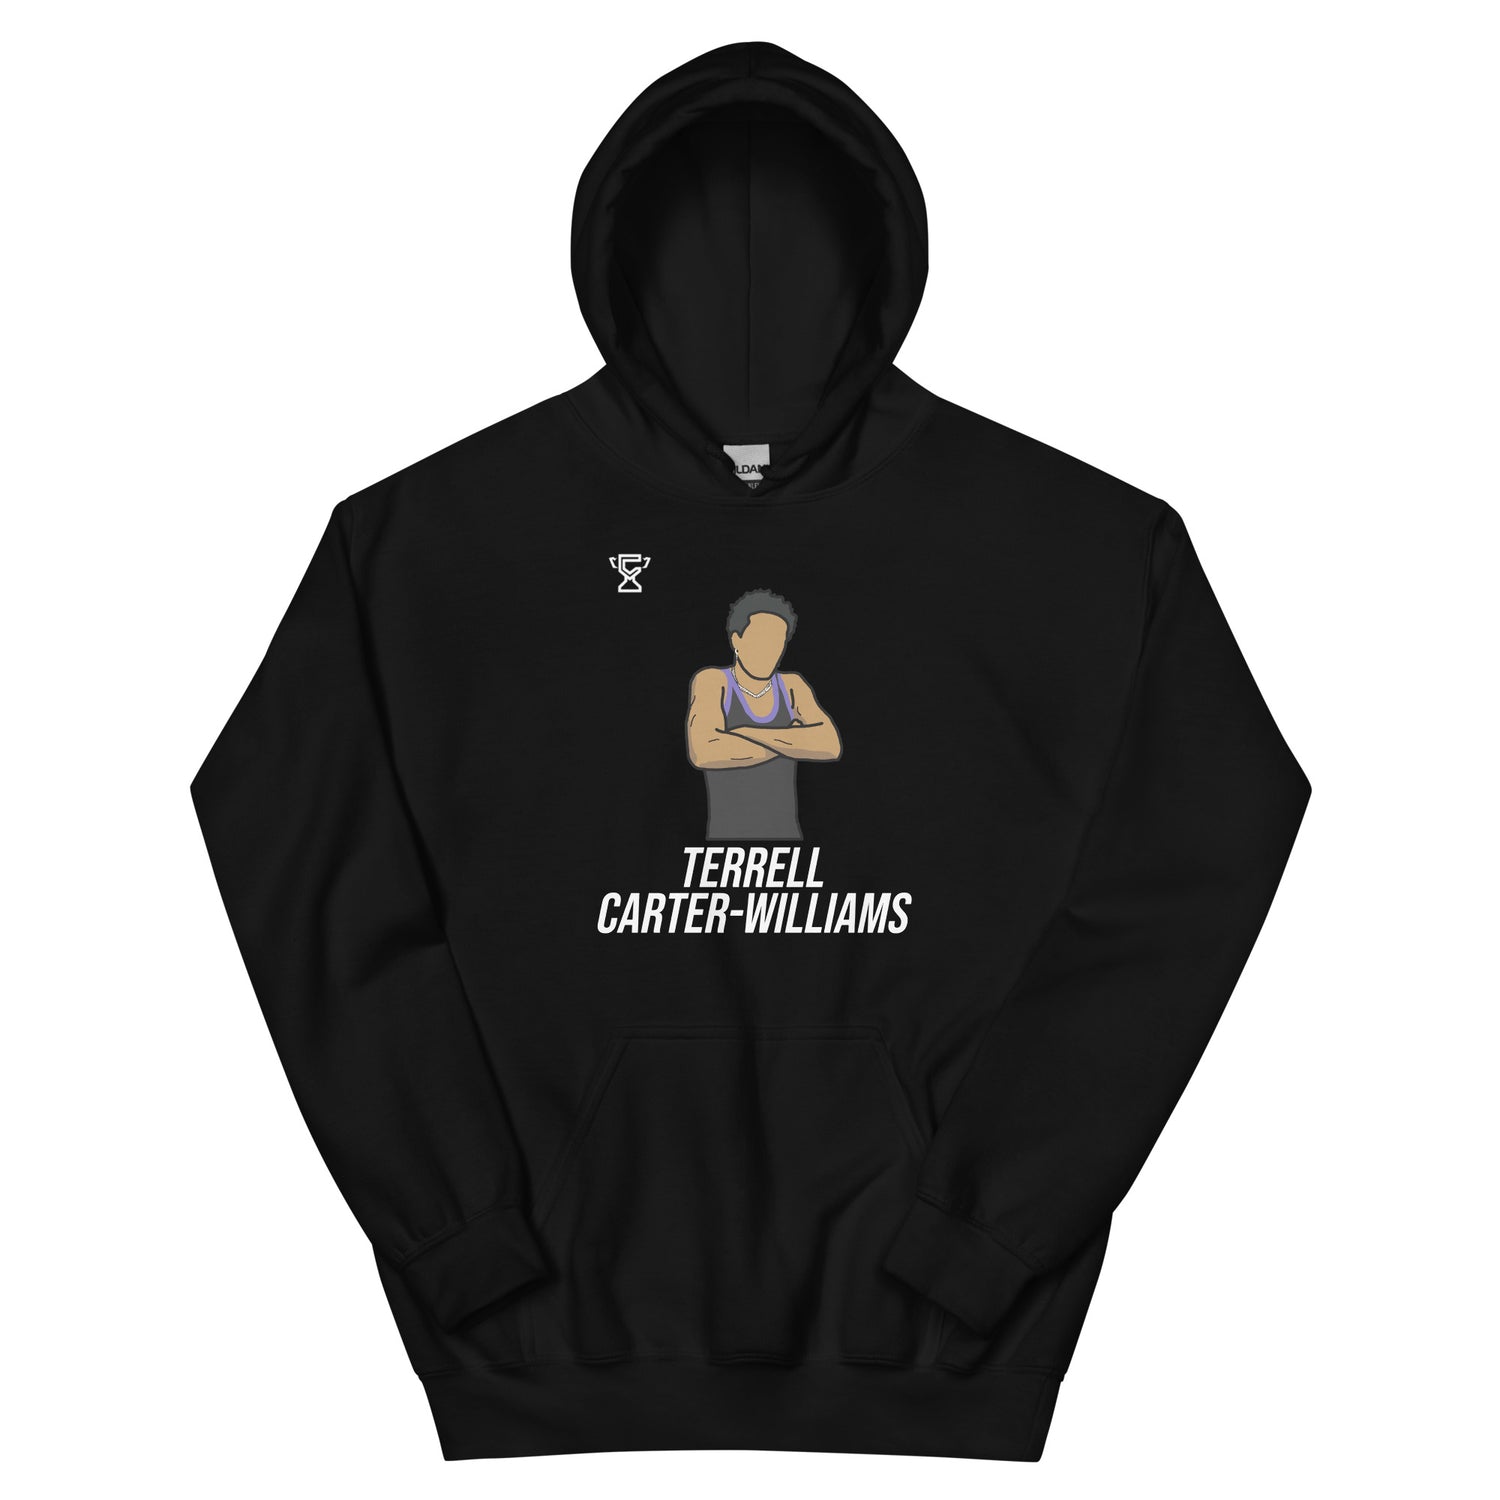 Black hoodie featuring Terrell Carter-Williams.